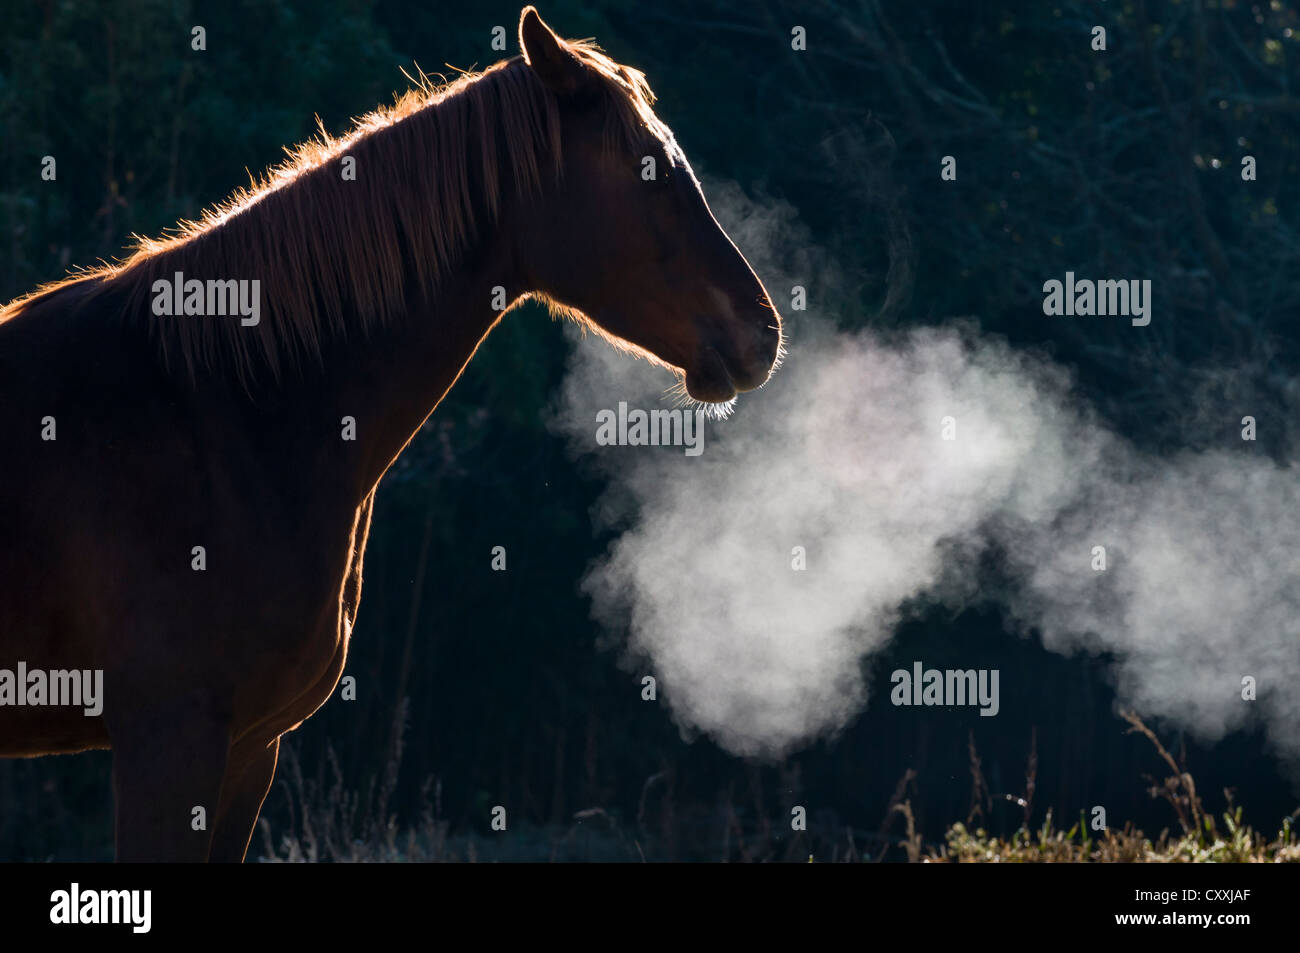 Horse, condensation of breath, South Africa, Africa Stock Photo